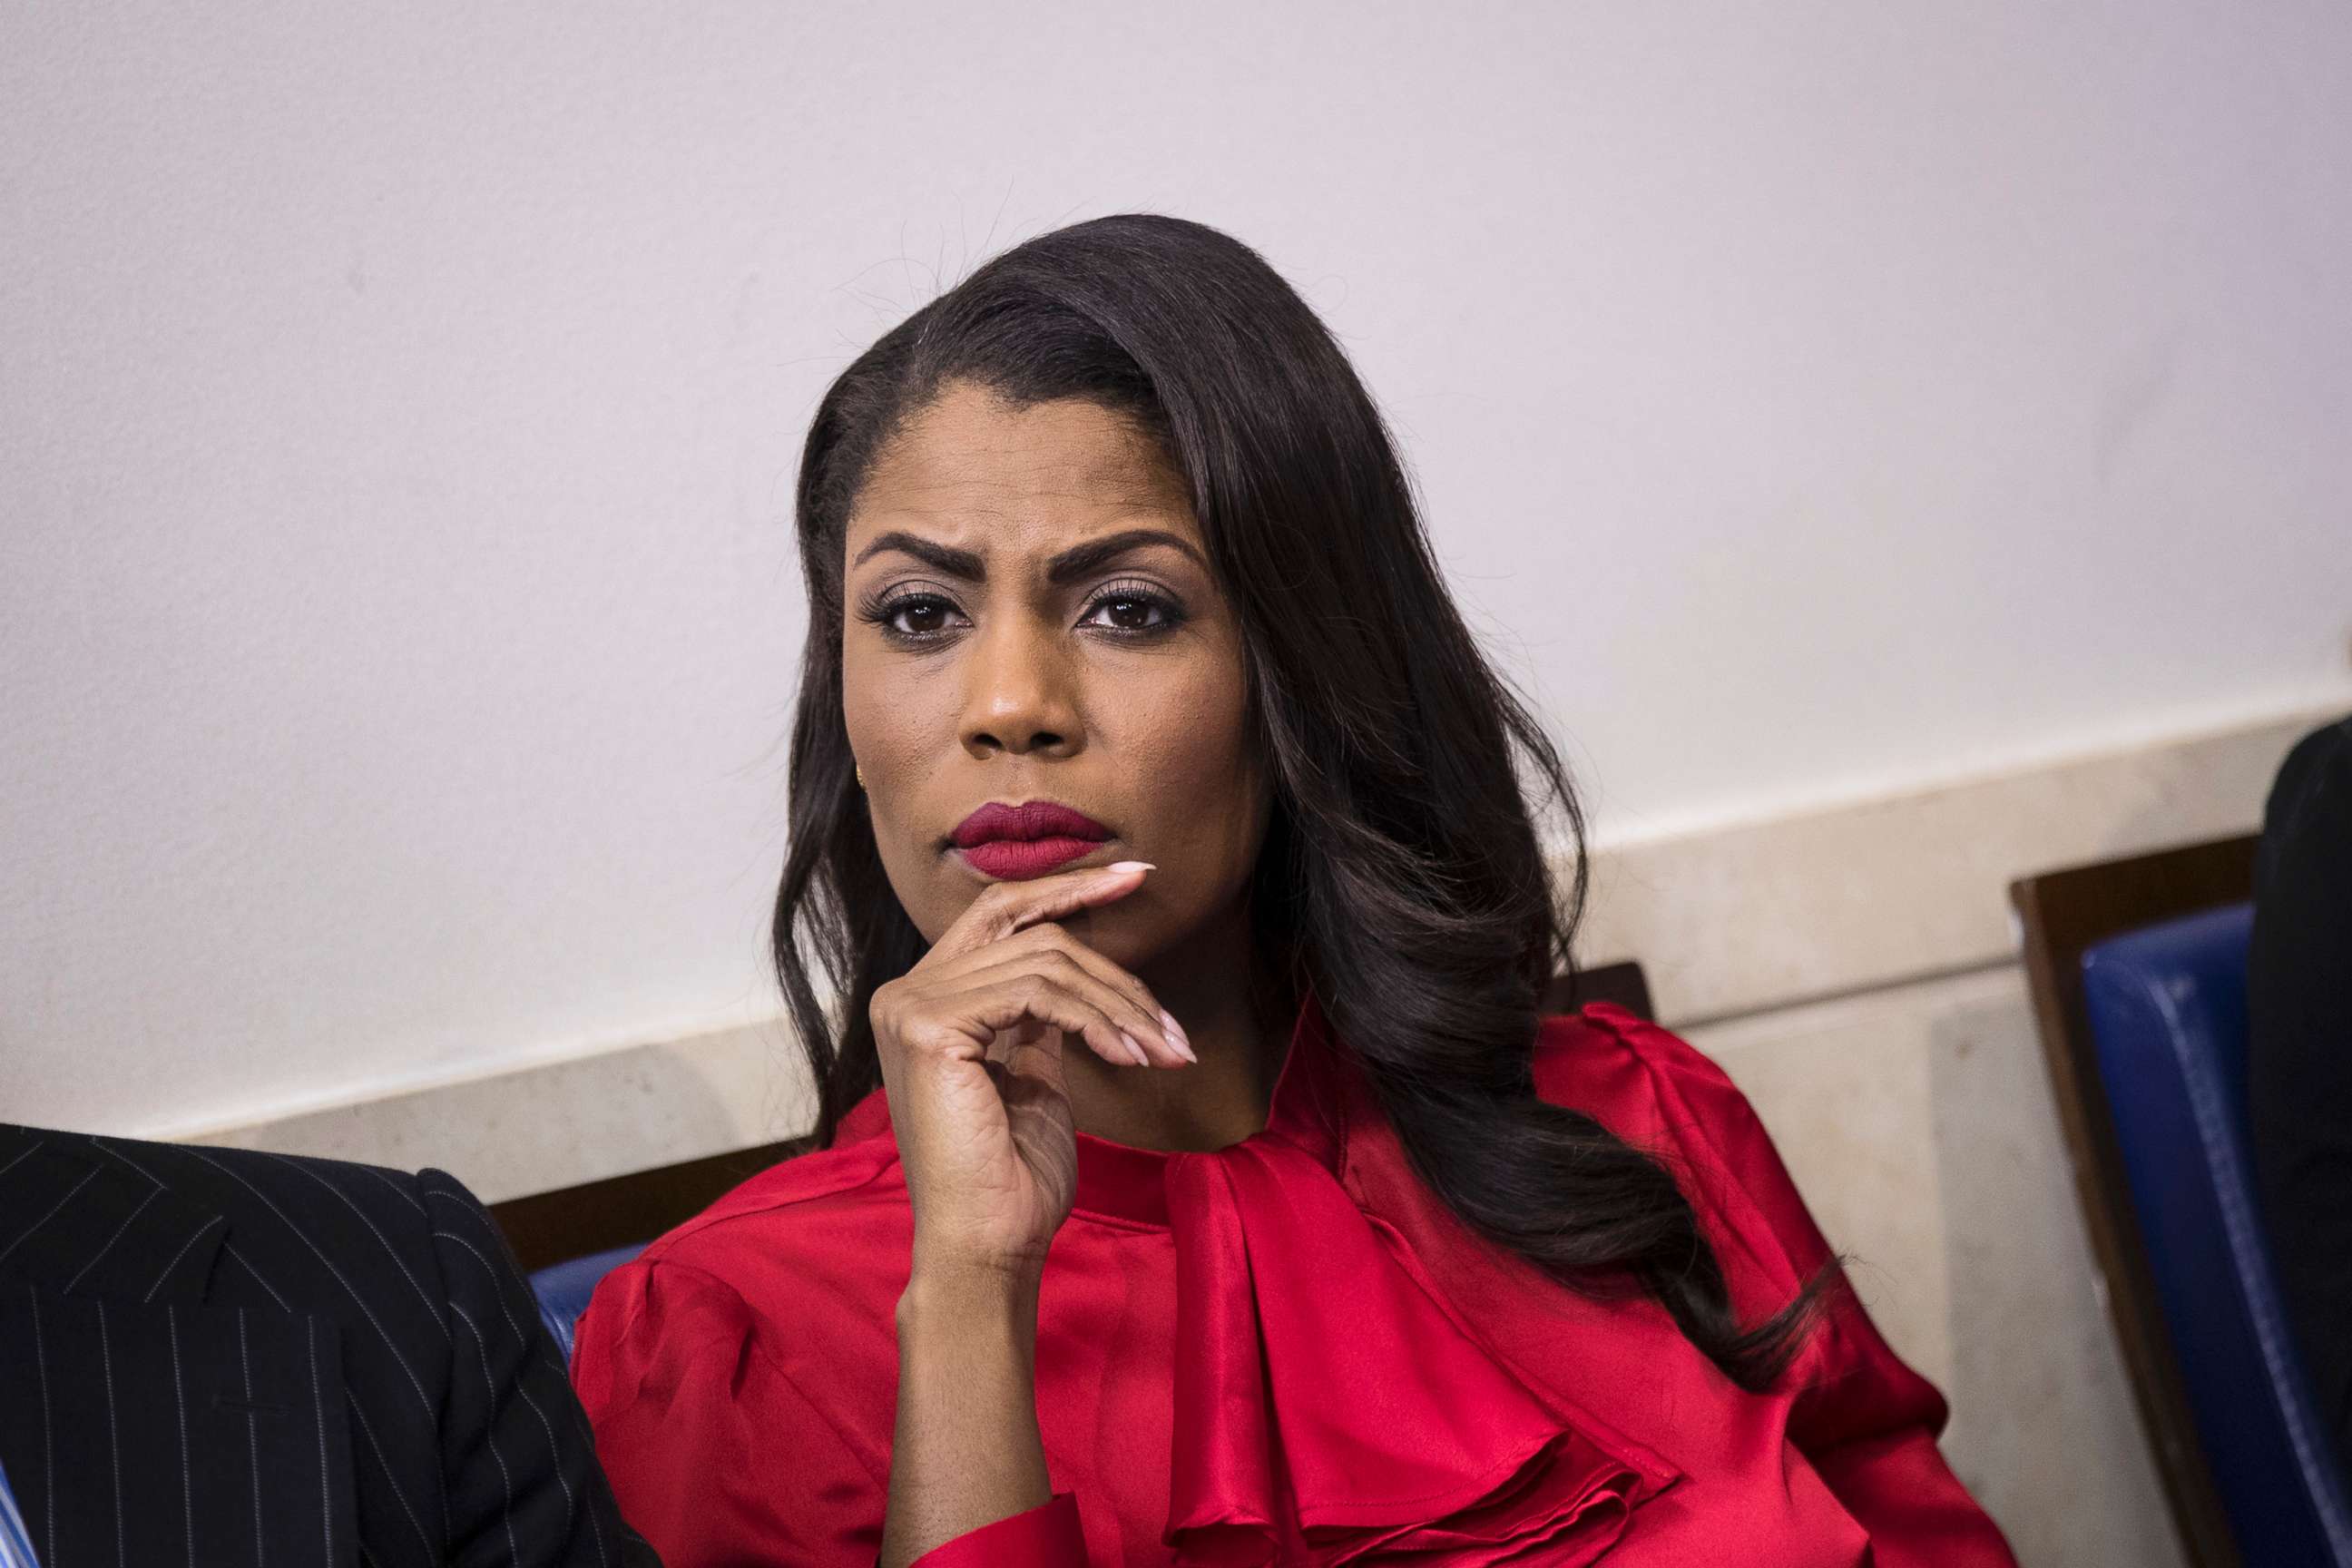 PHOTO: Director of Communications for the White House Public Liaison Office Omarosa Manigault listens during the daily press briefing at the White House, Oct. 27, 2017.